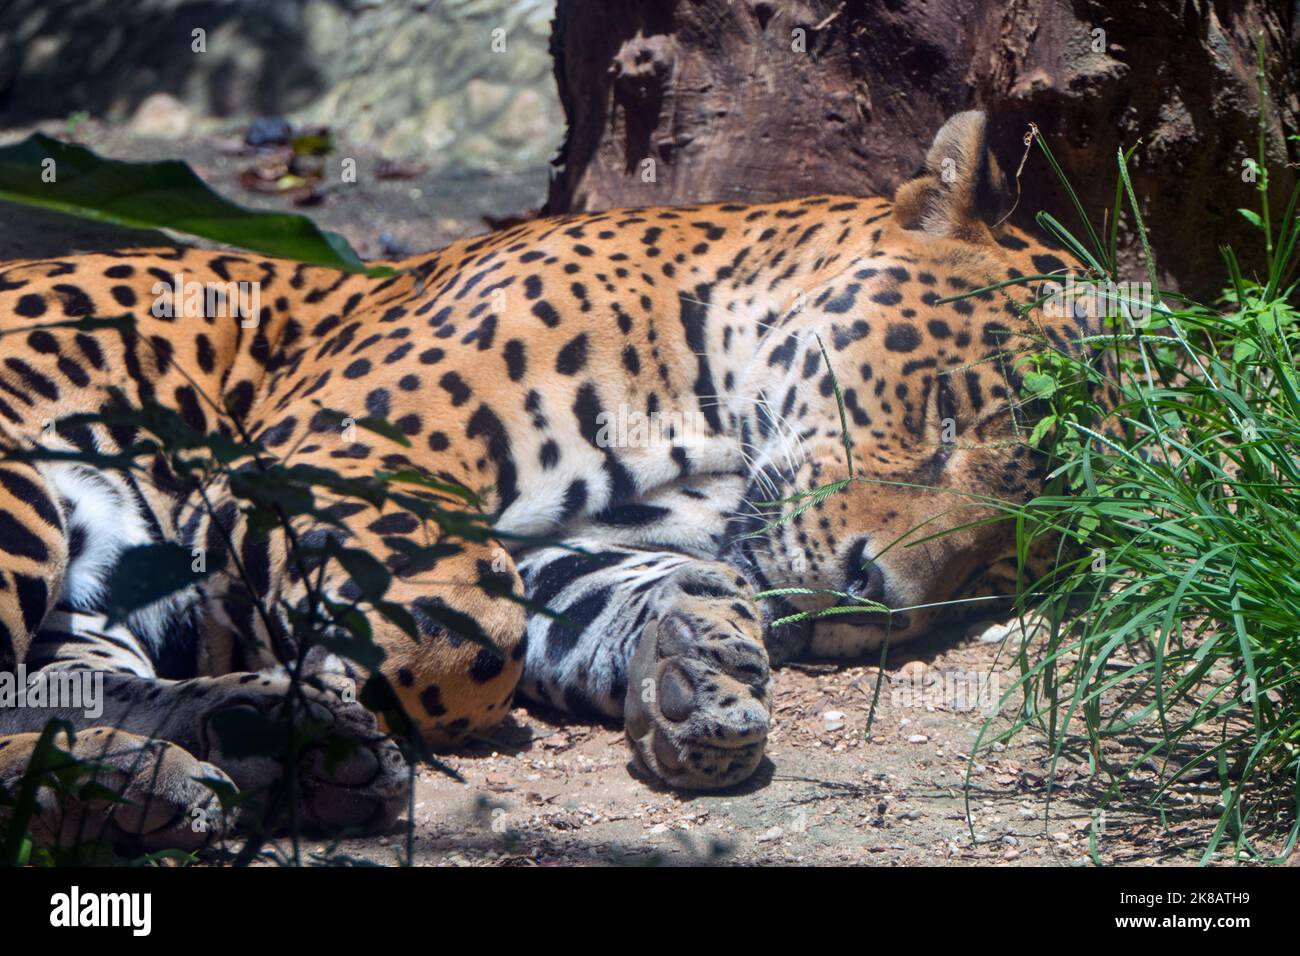 Large male jaguar in zoo cage in Chiapas, Mexico. Big cat (Panthera onca) napping in enclosure Stock Photo